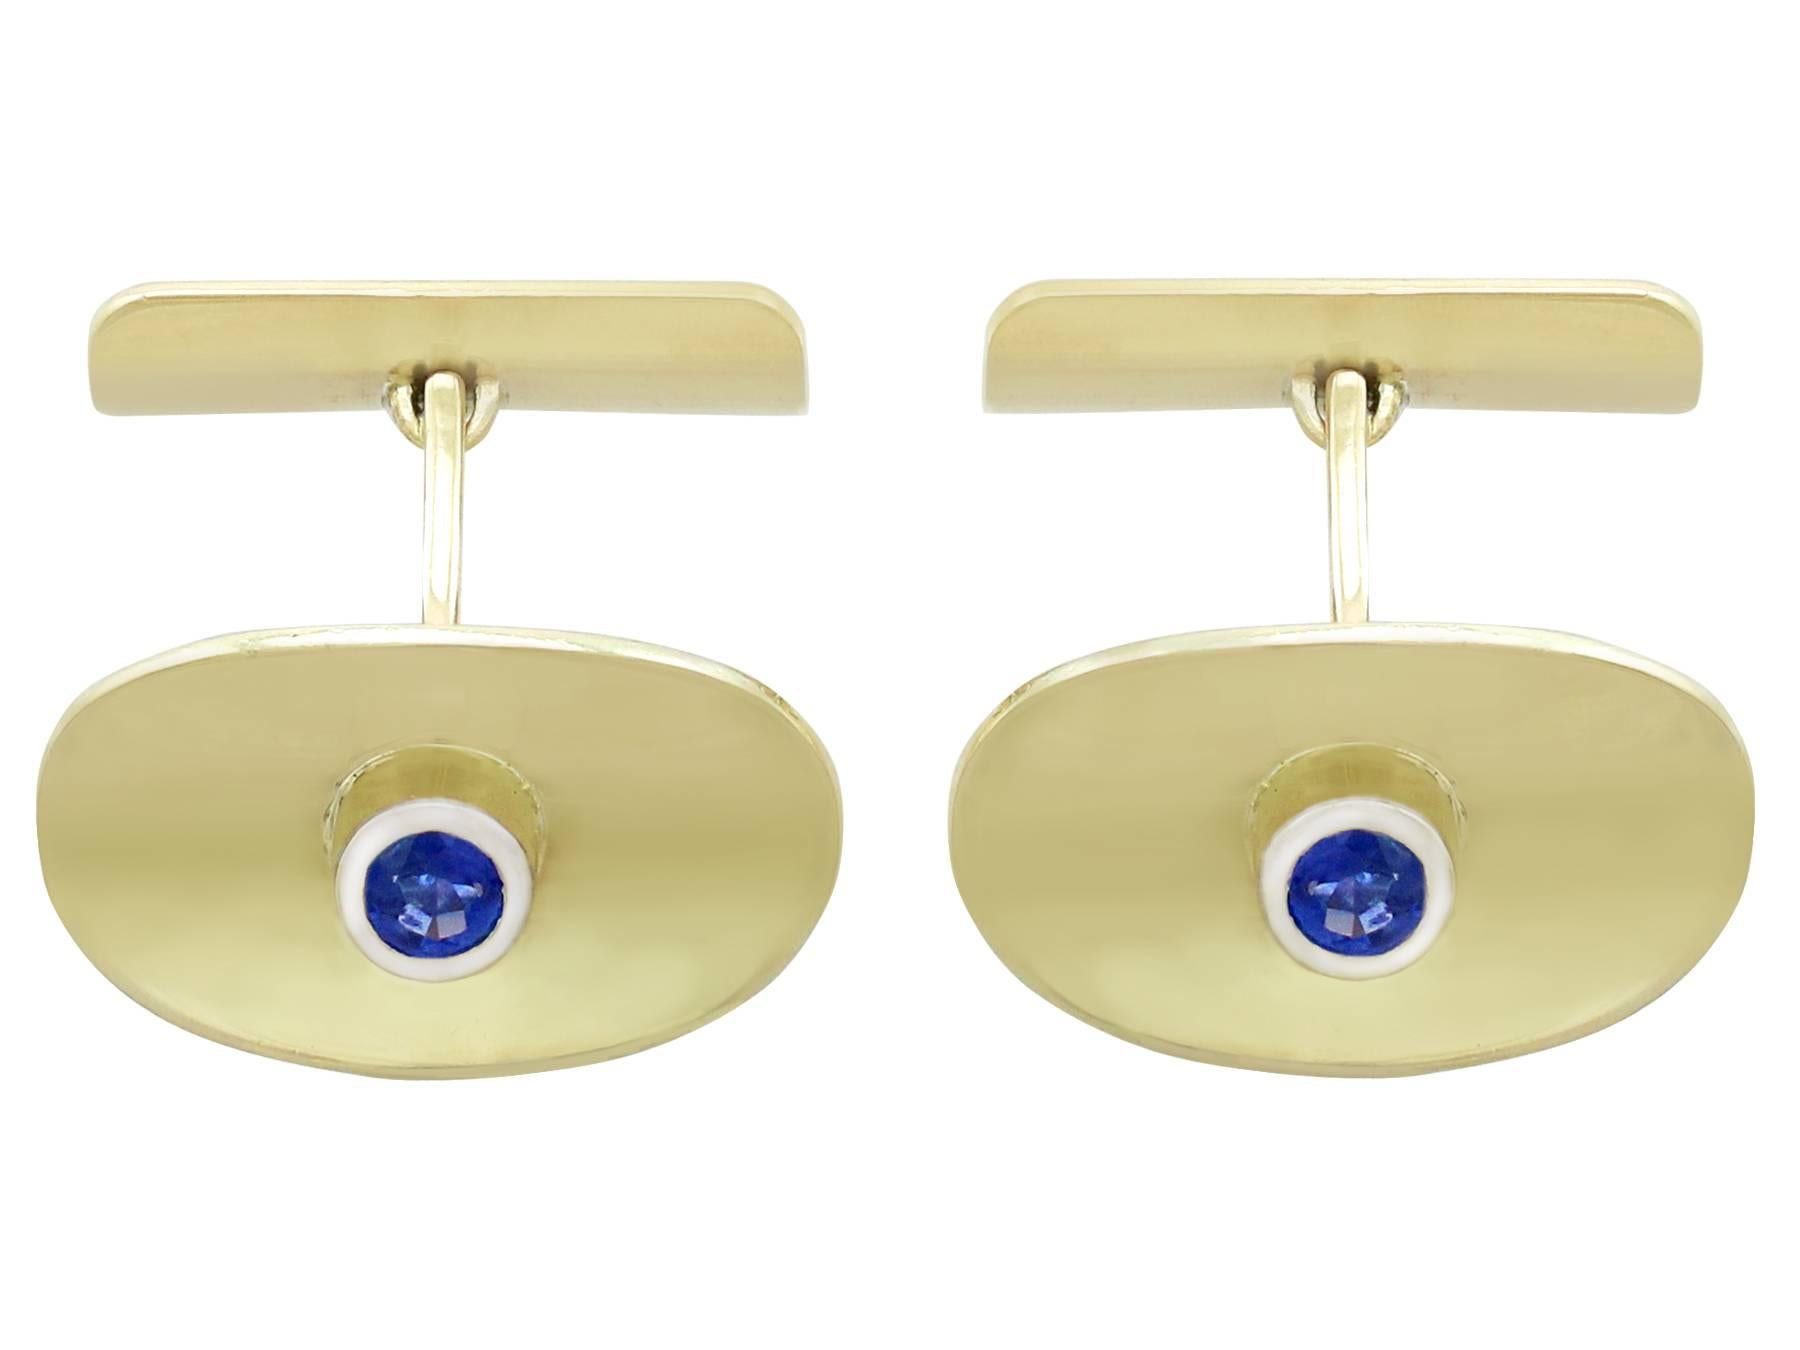 An impressive pair of vintage 1950s 0.59 carat blue sapphire and 14 karat yellow gold cufflinks; part of our diverse sapphire jewelry and estate jewelry collections.

These fine and impressive gold sapphire cufflinks have been crafted in 14k yellow